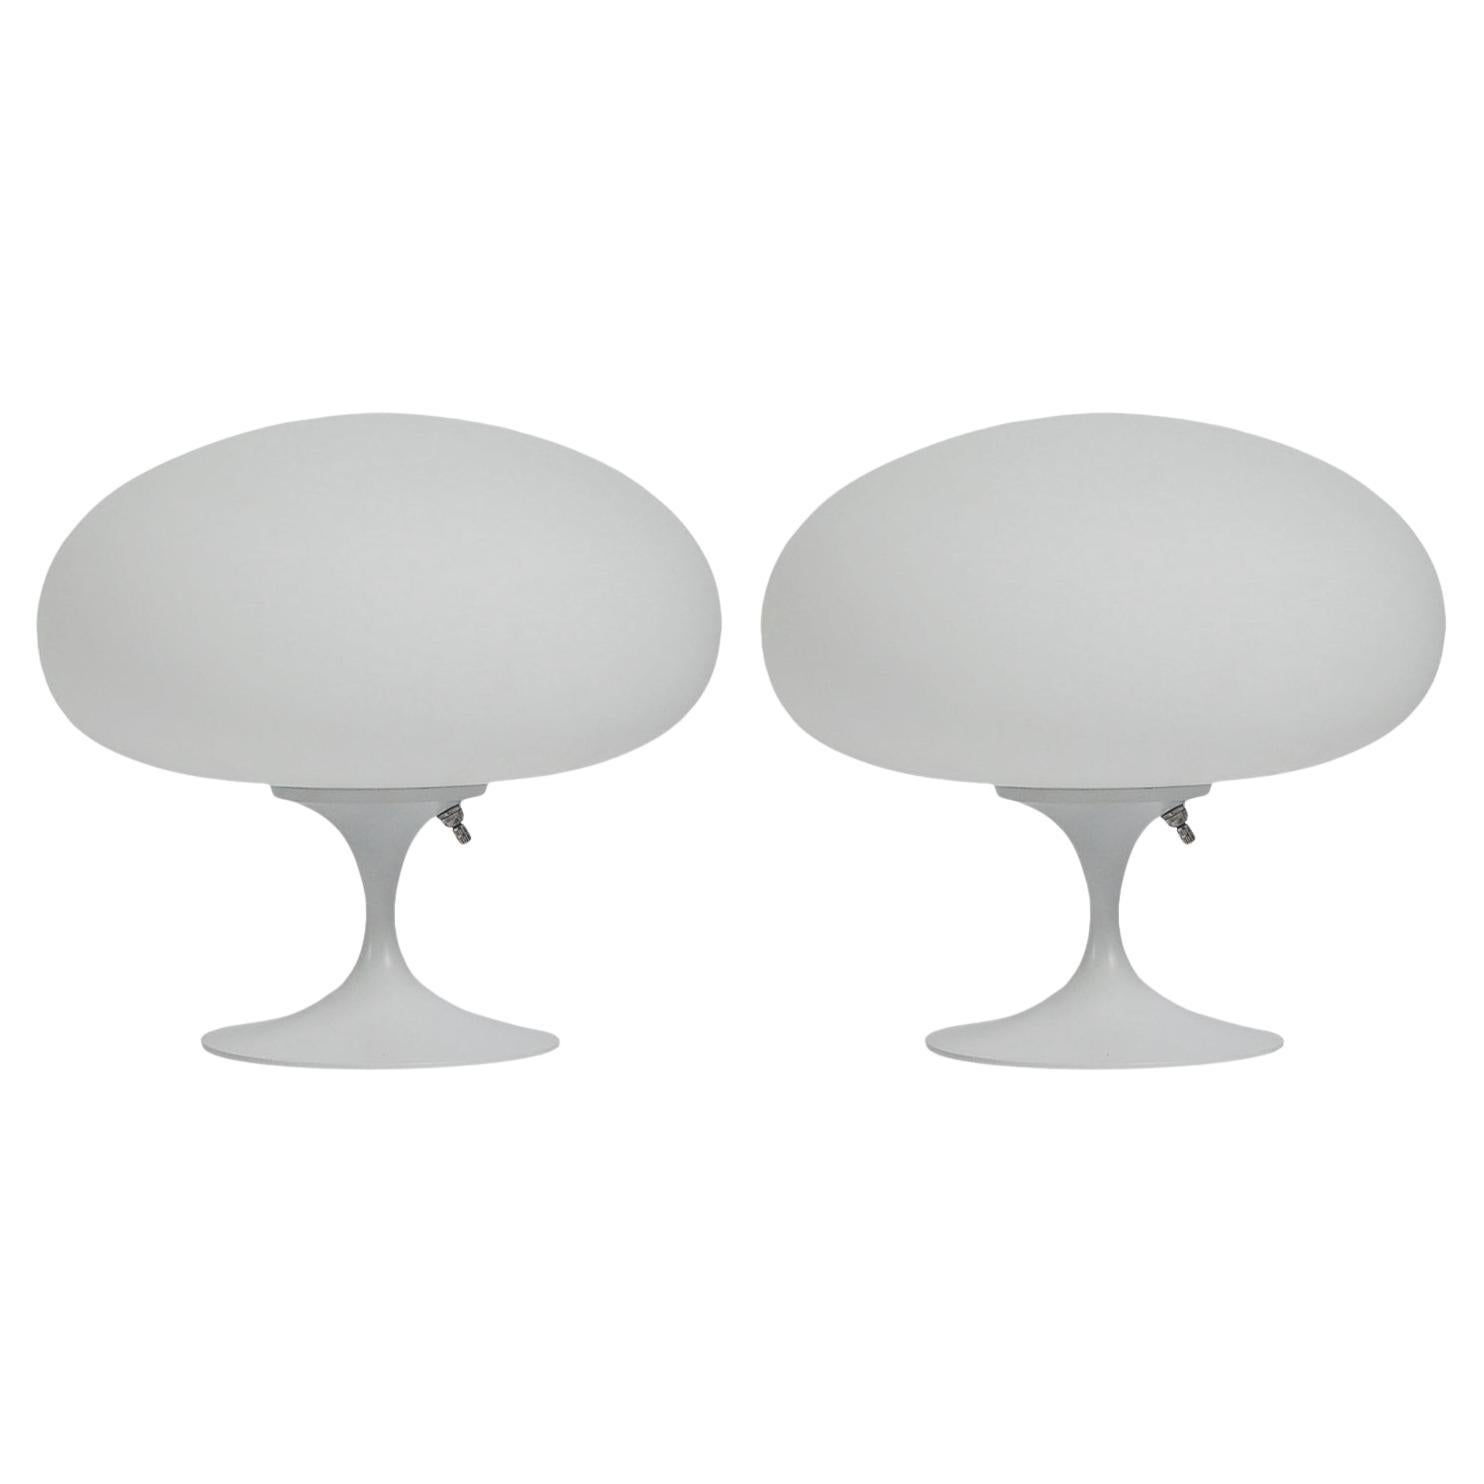 Pair of Mid-Century Tulip Table Lamps by Designline in White on White Glass For Sale